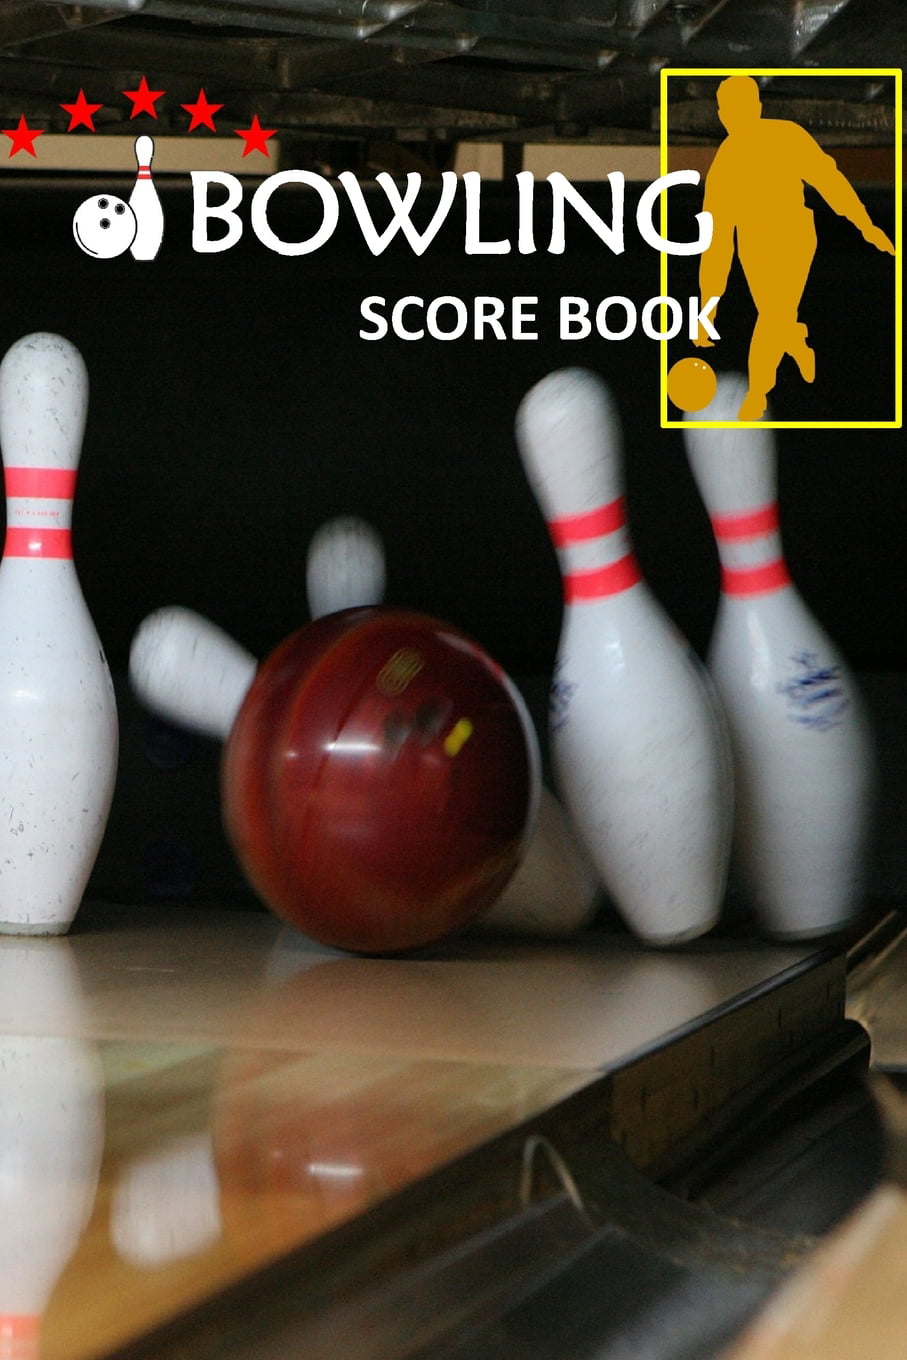 vol-bowling-score-book-bowling-game-record-book-track-your-scores